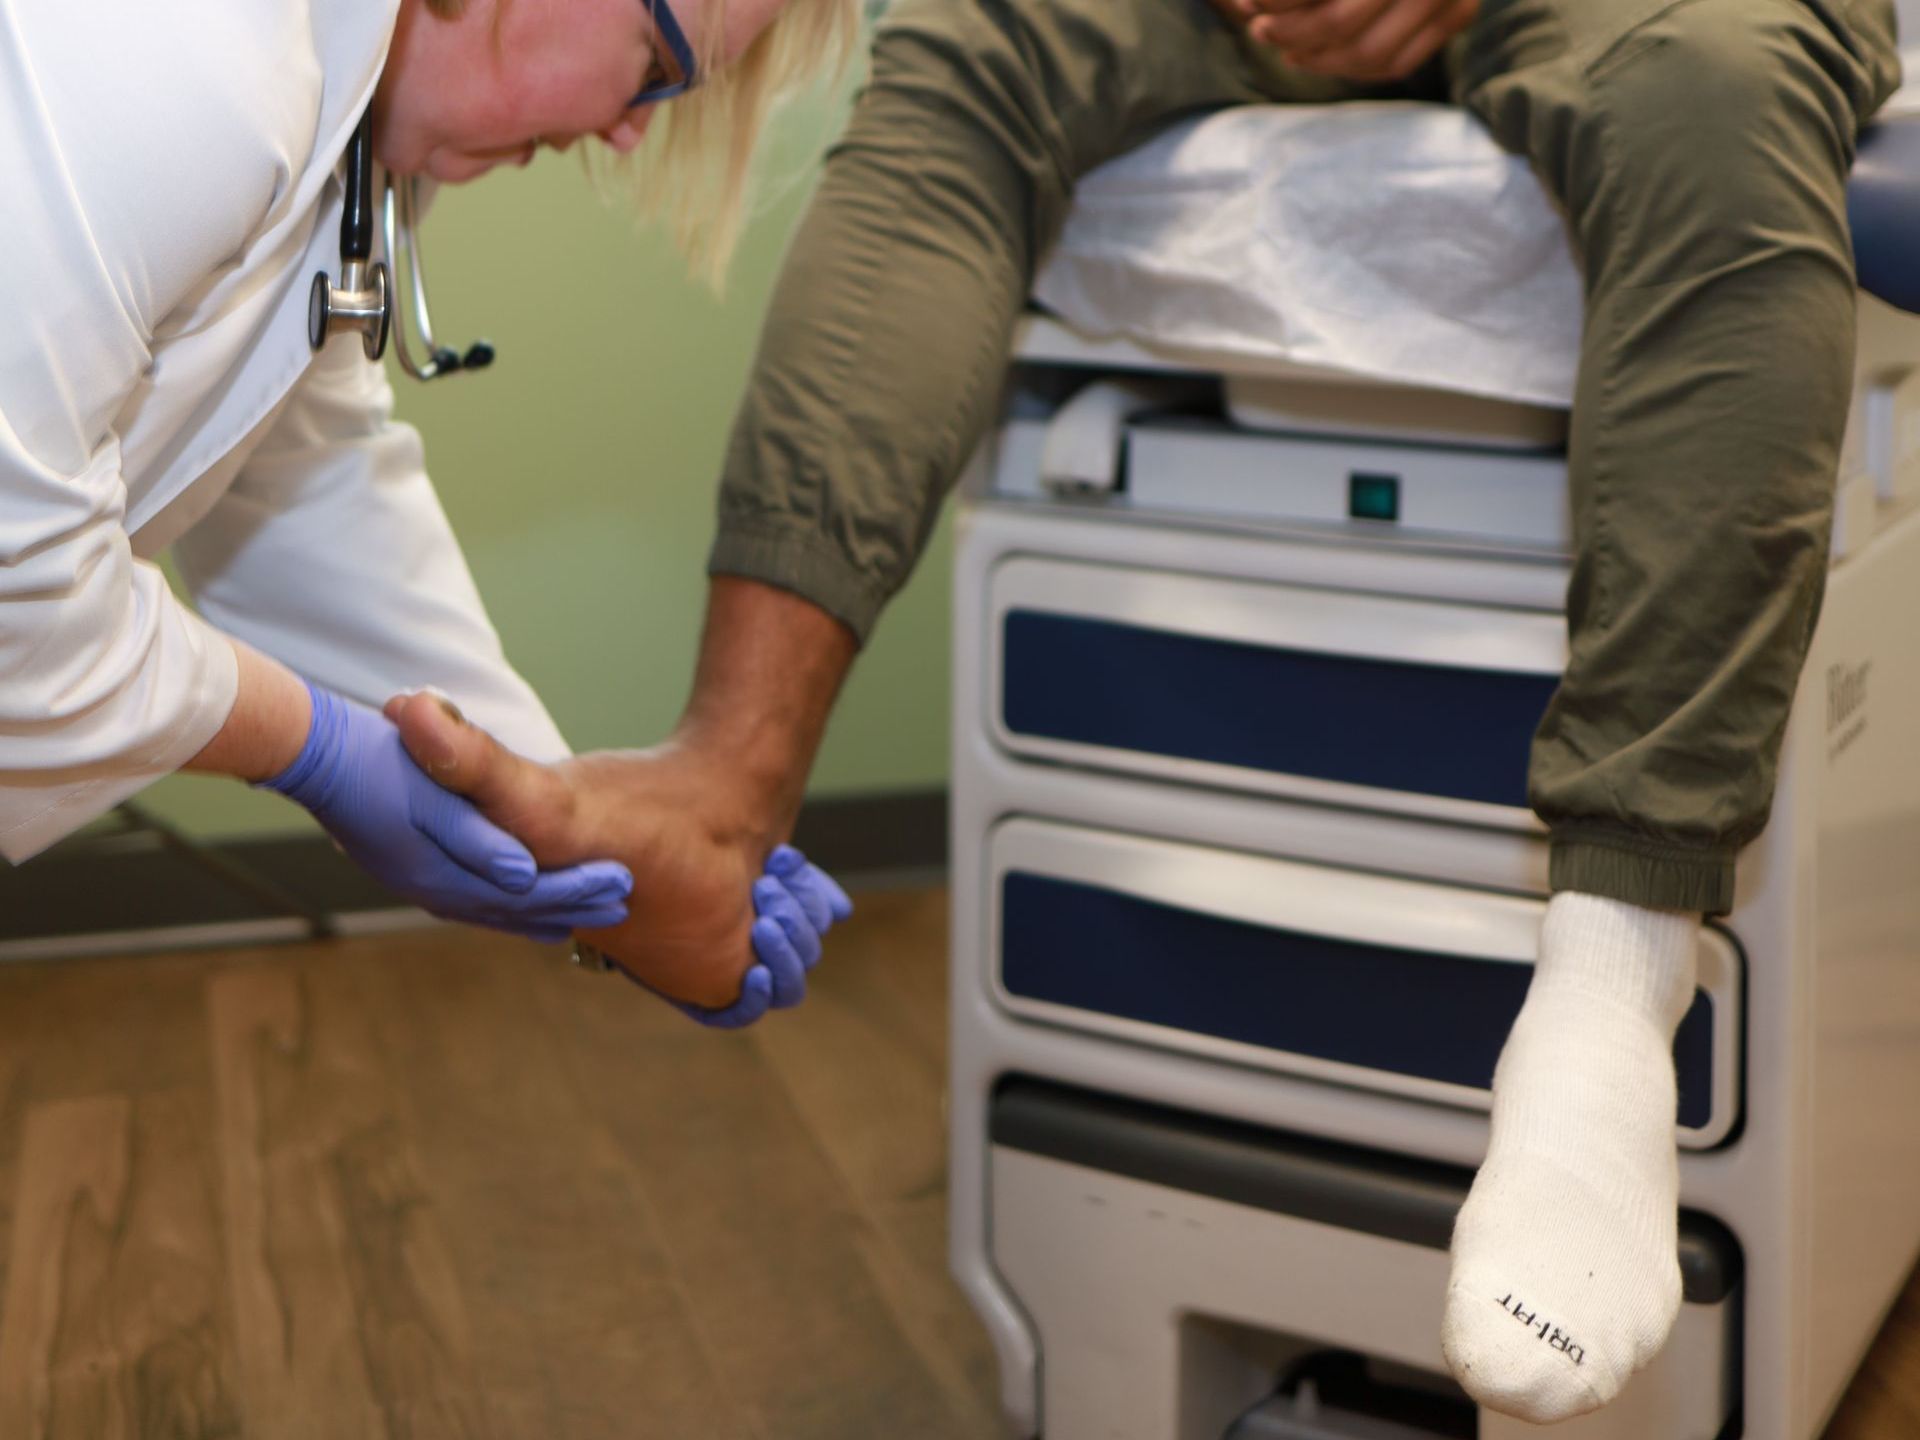 An image of a female doctor looking at the foot of a male patient